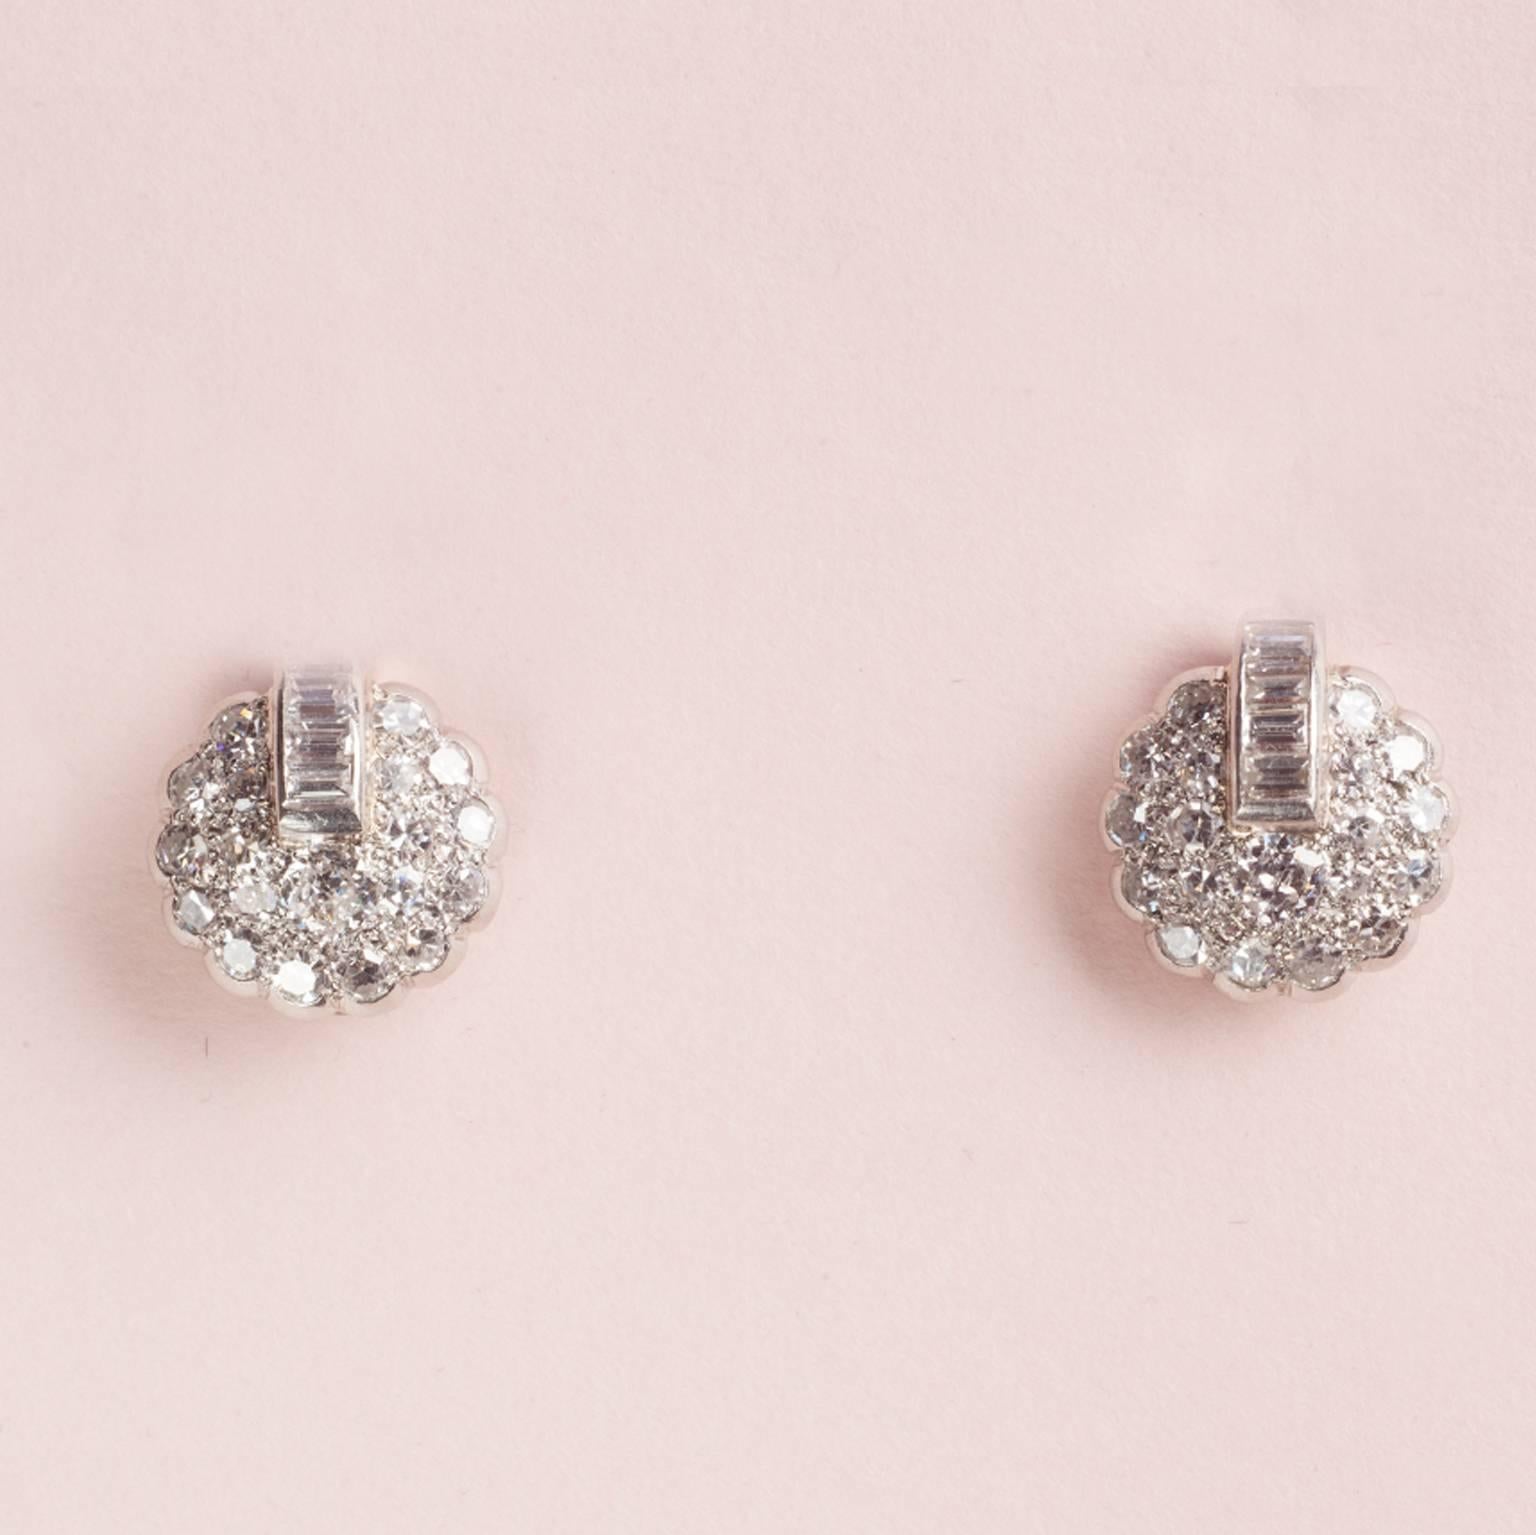 A pair of Art Deco earclips set with old cut and baguette cut diamonds (app. 1.12 carat), England, circa 1930, in blue case.

weight: 5 grams
diameter: 9 mm.